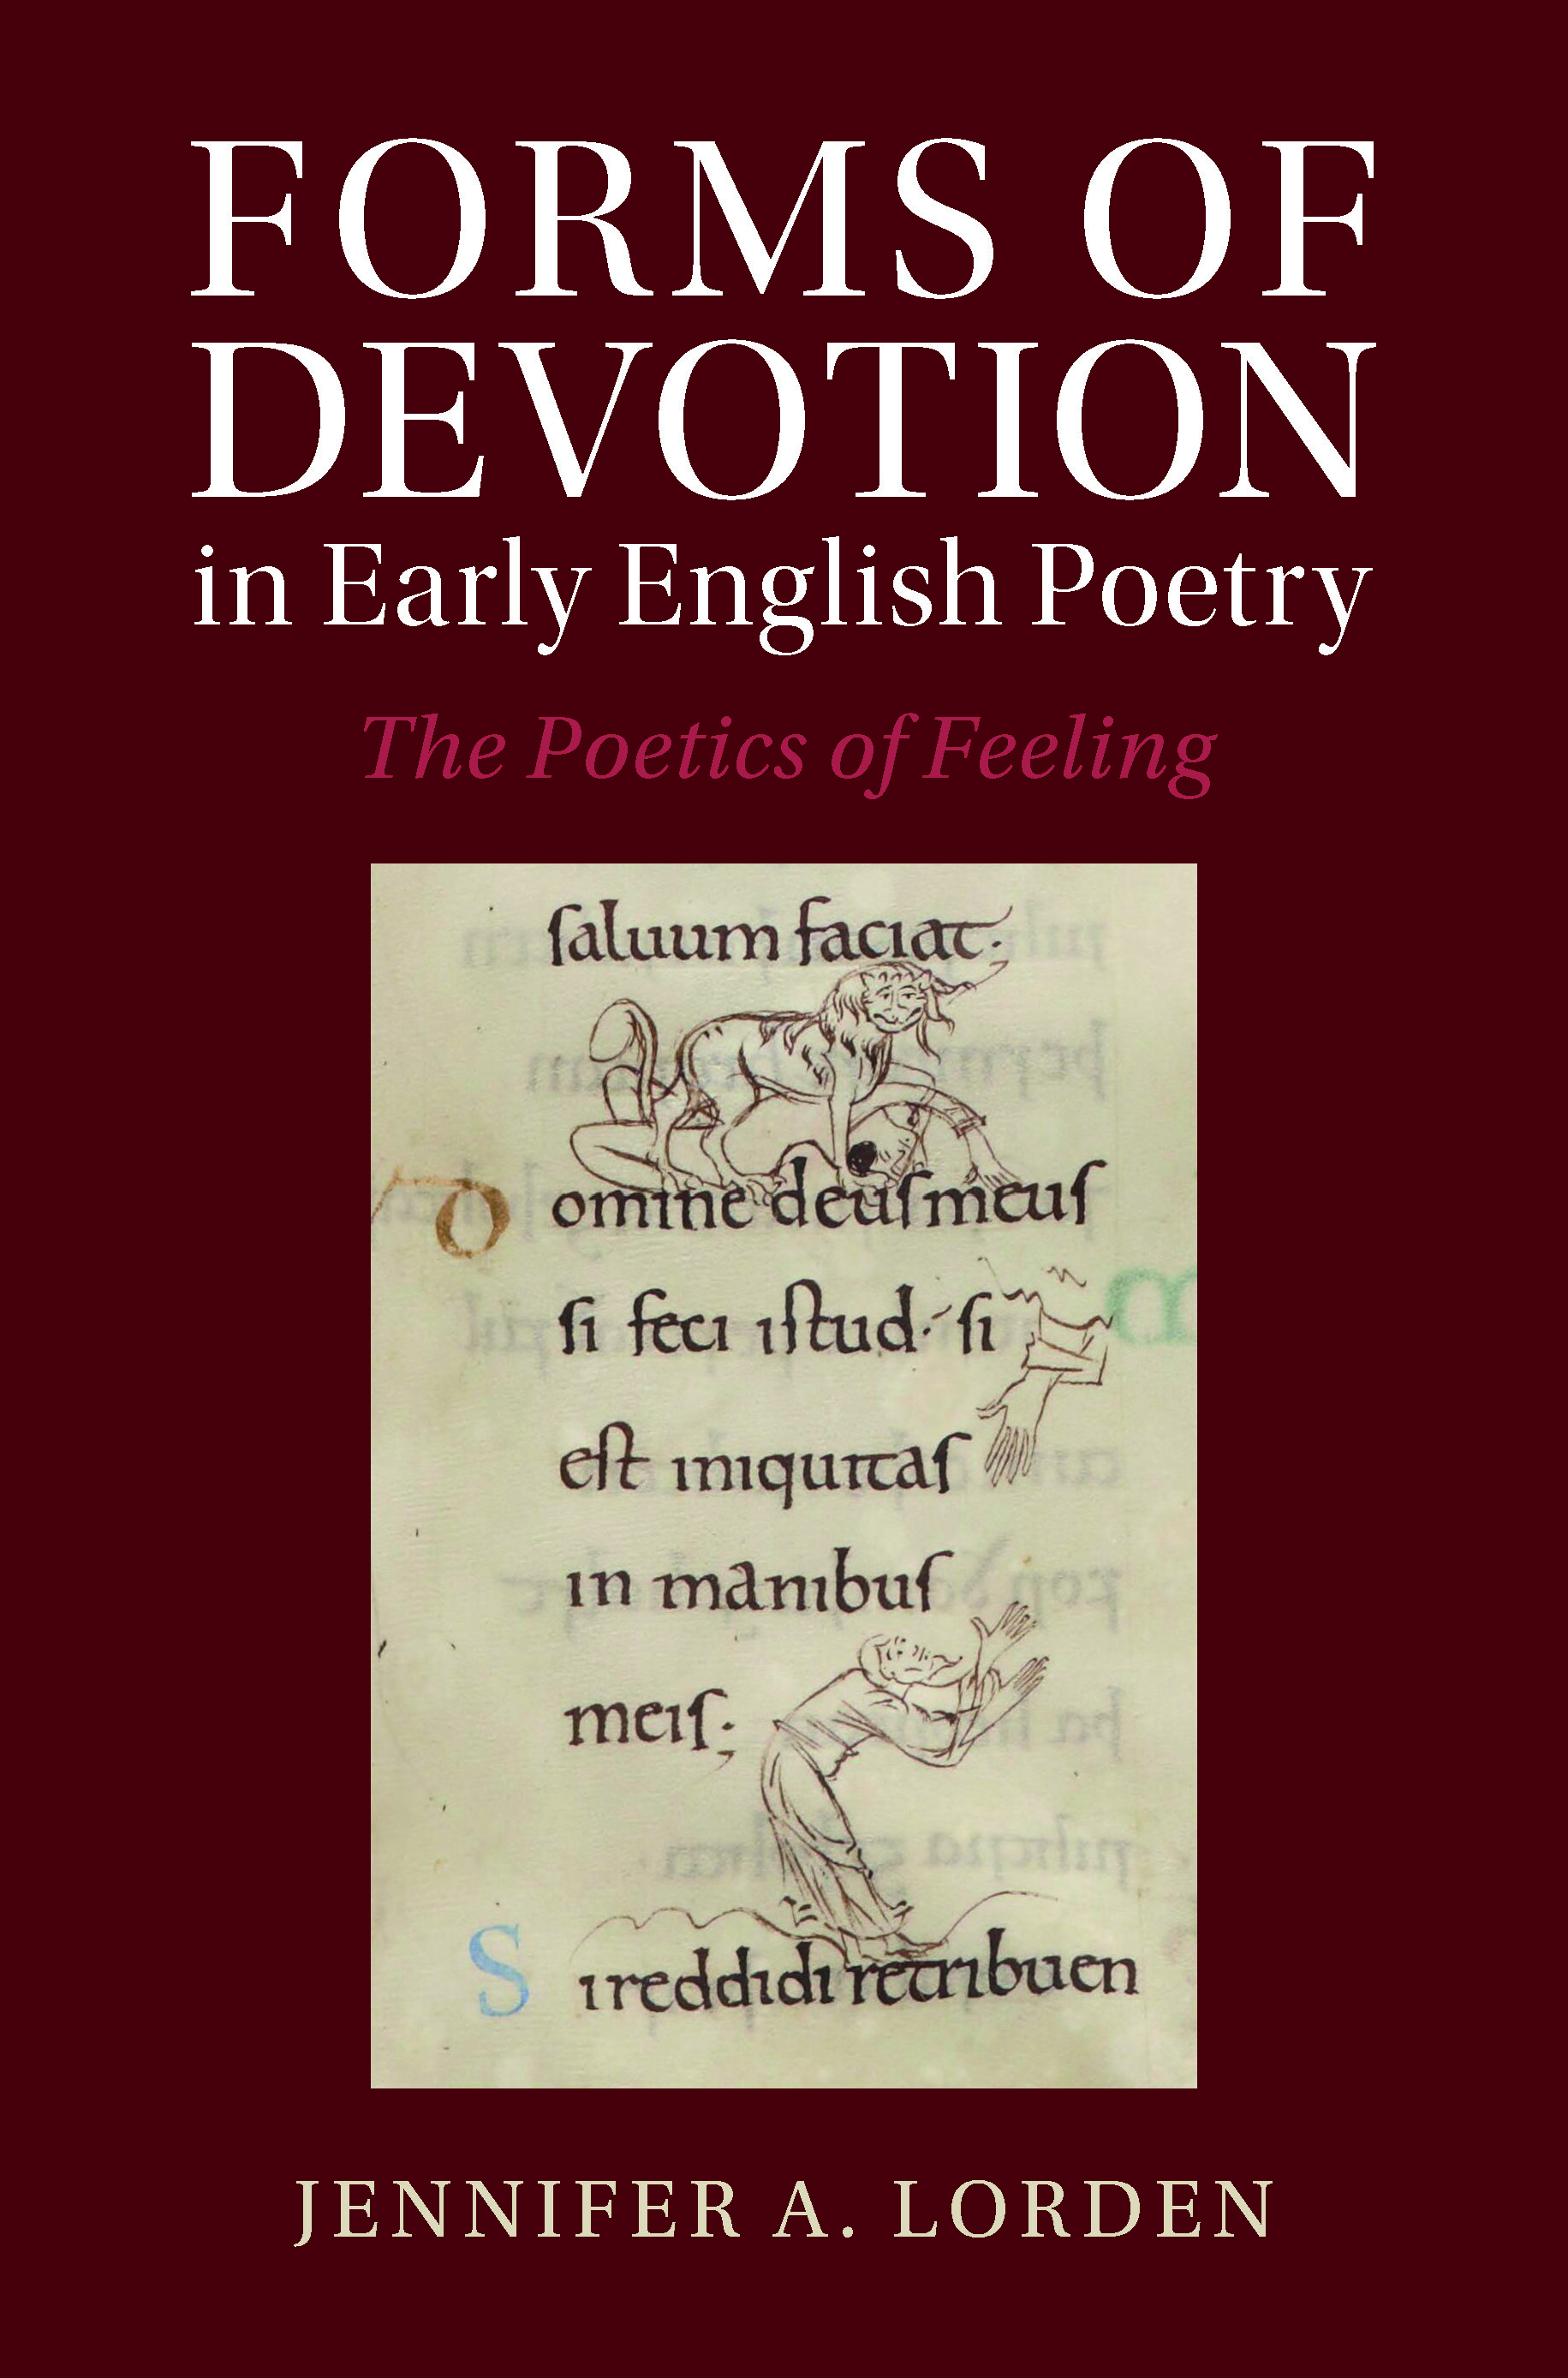 Forms of Devotion in Early English by Jennifer Lorden